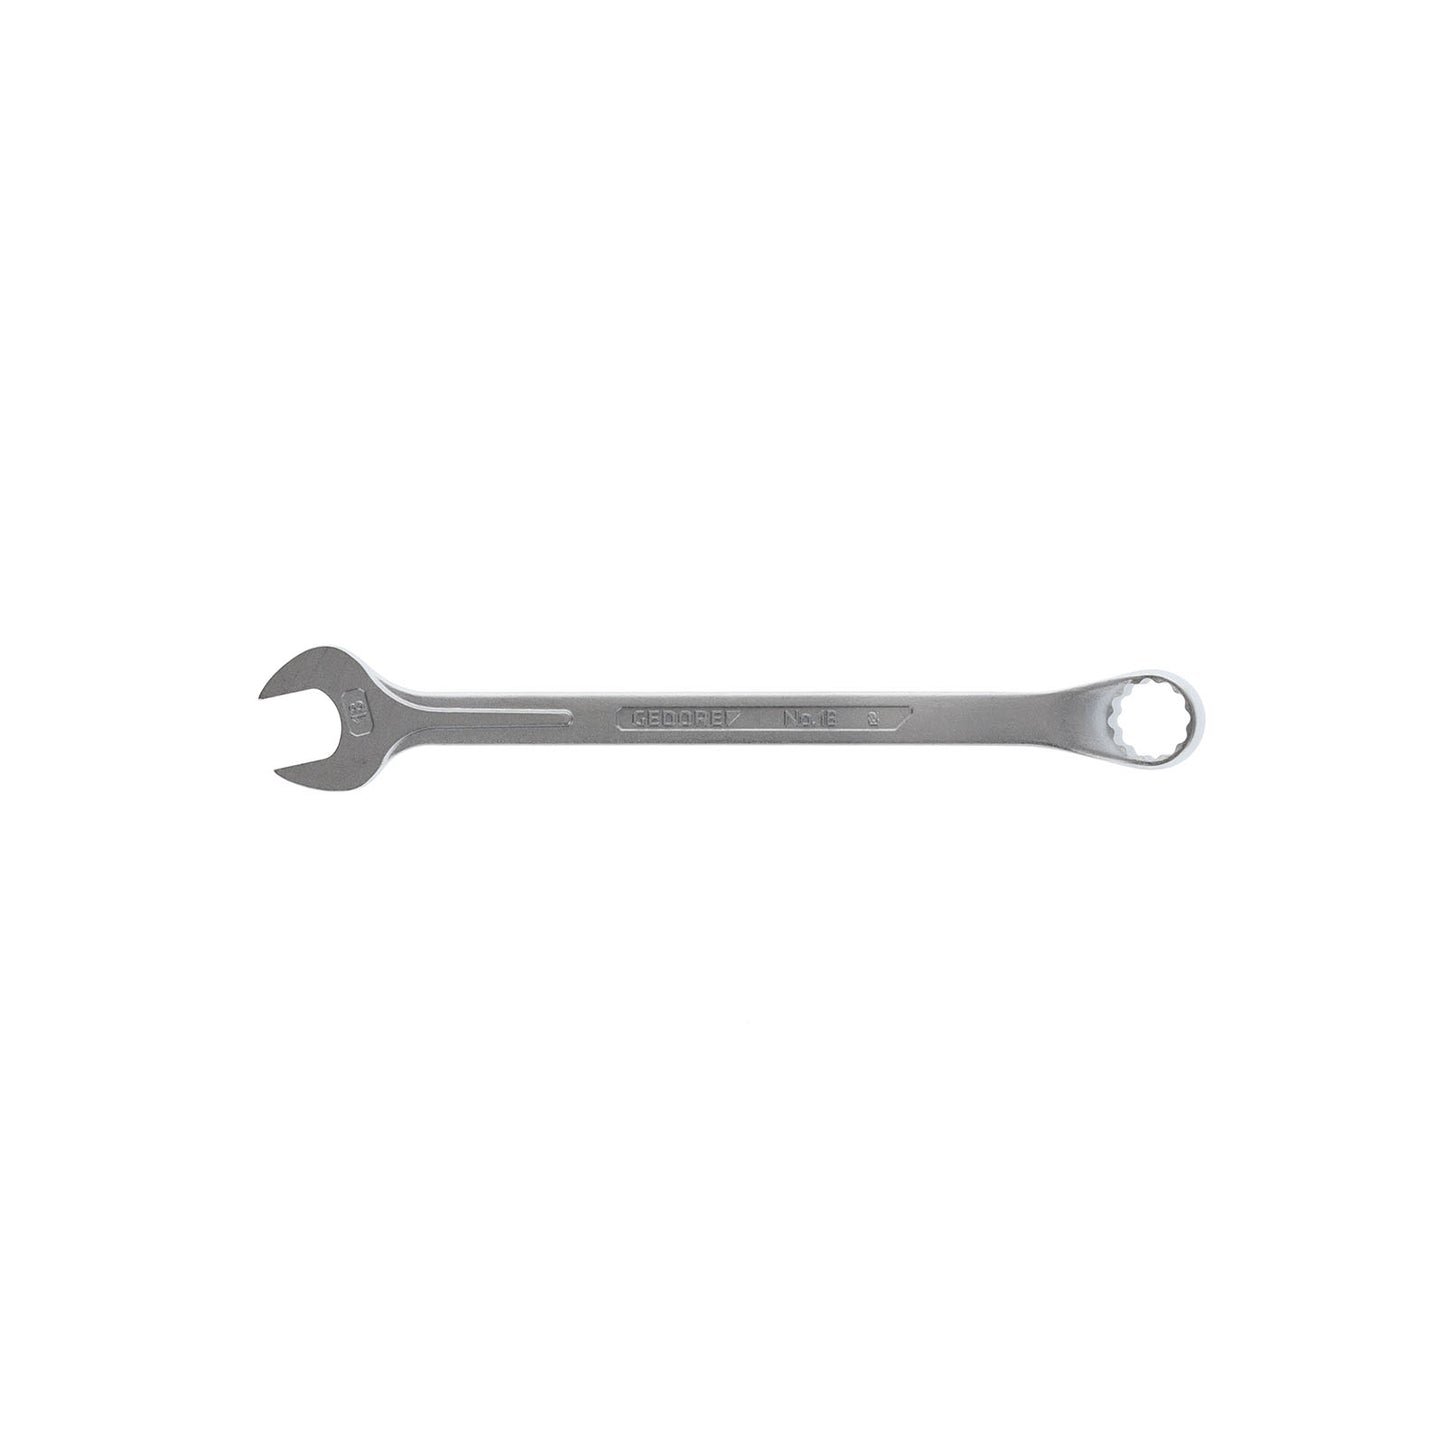 GEDORE 1 B 18 - Offset Combination Wrench, 18mm (6001720)